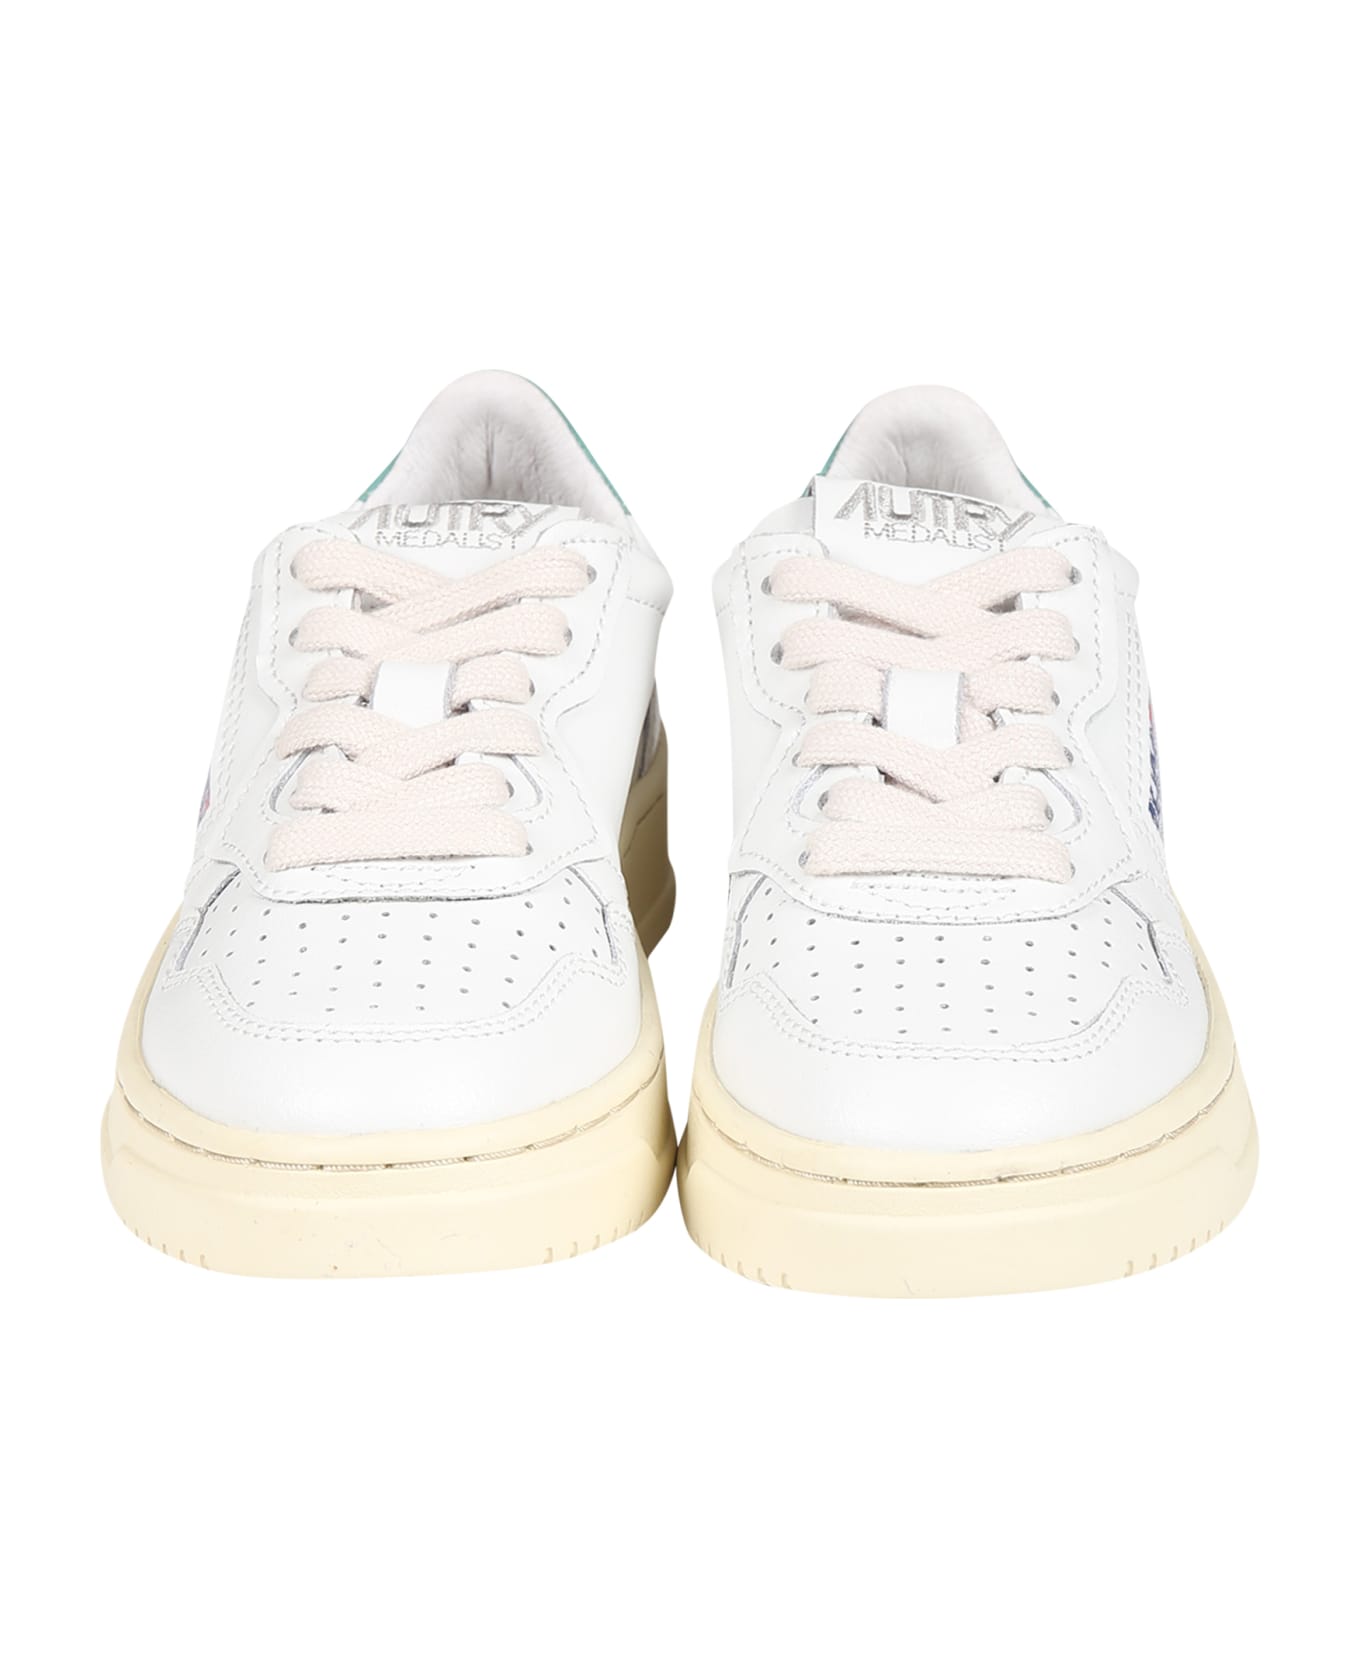 Autry White Sneakers For Kids With Logo - White シューズ